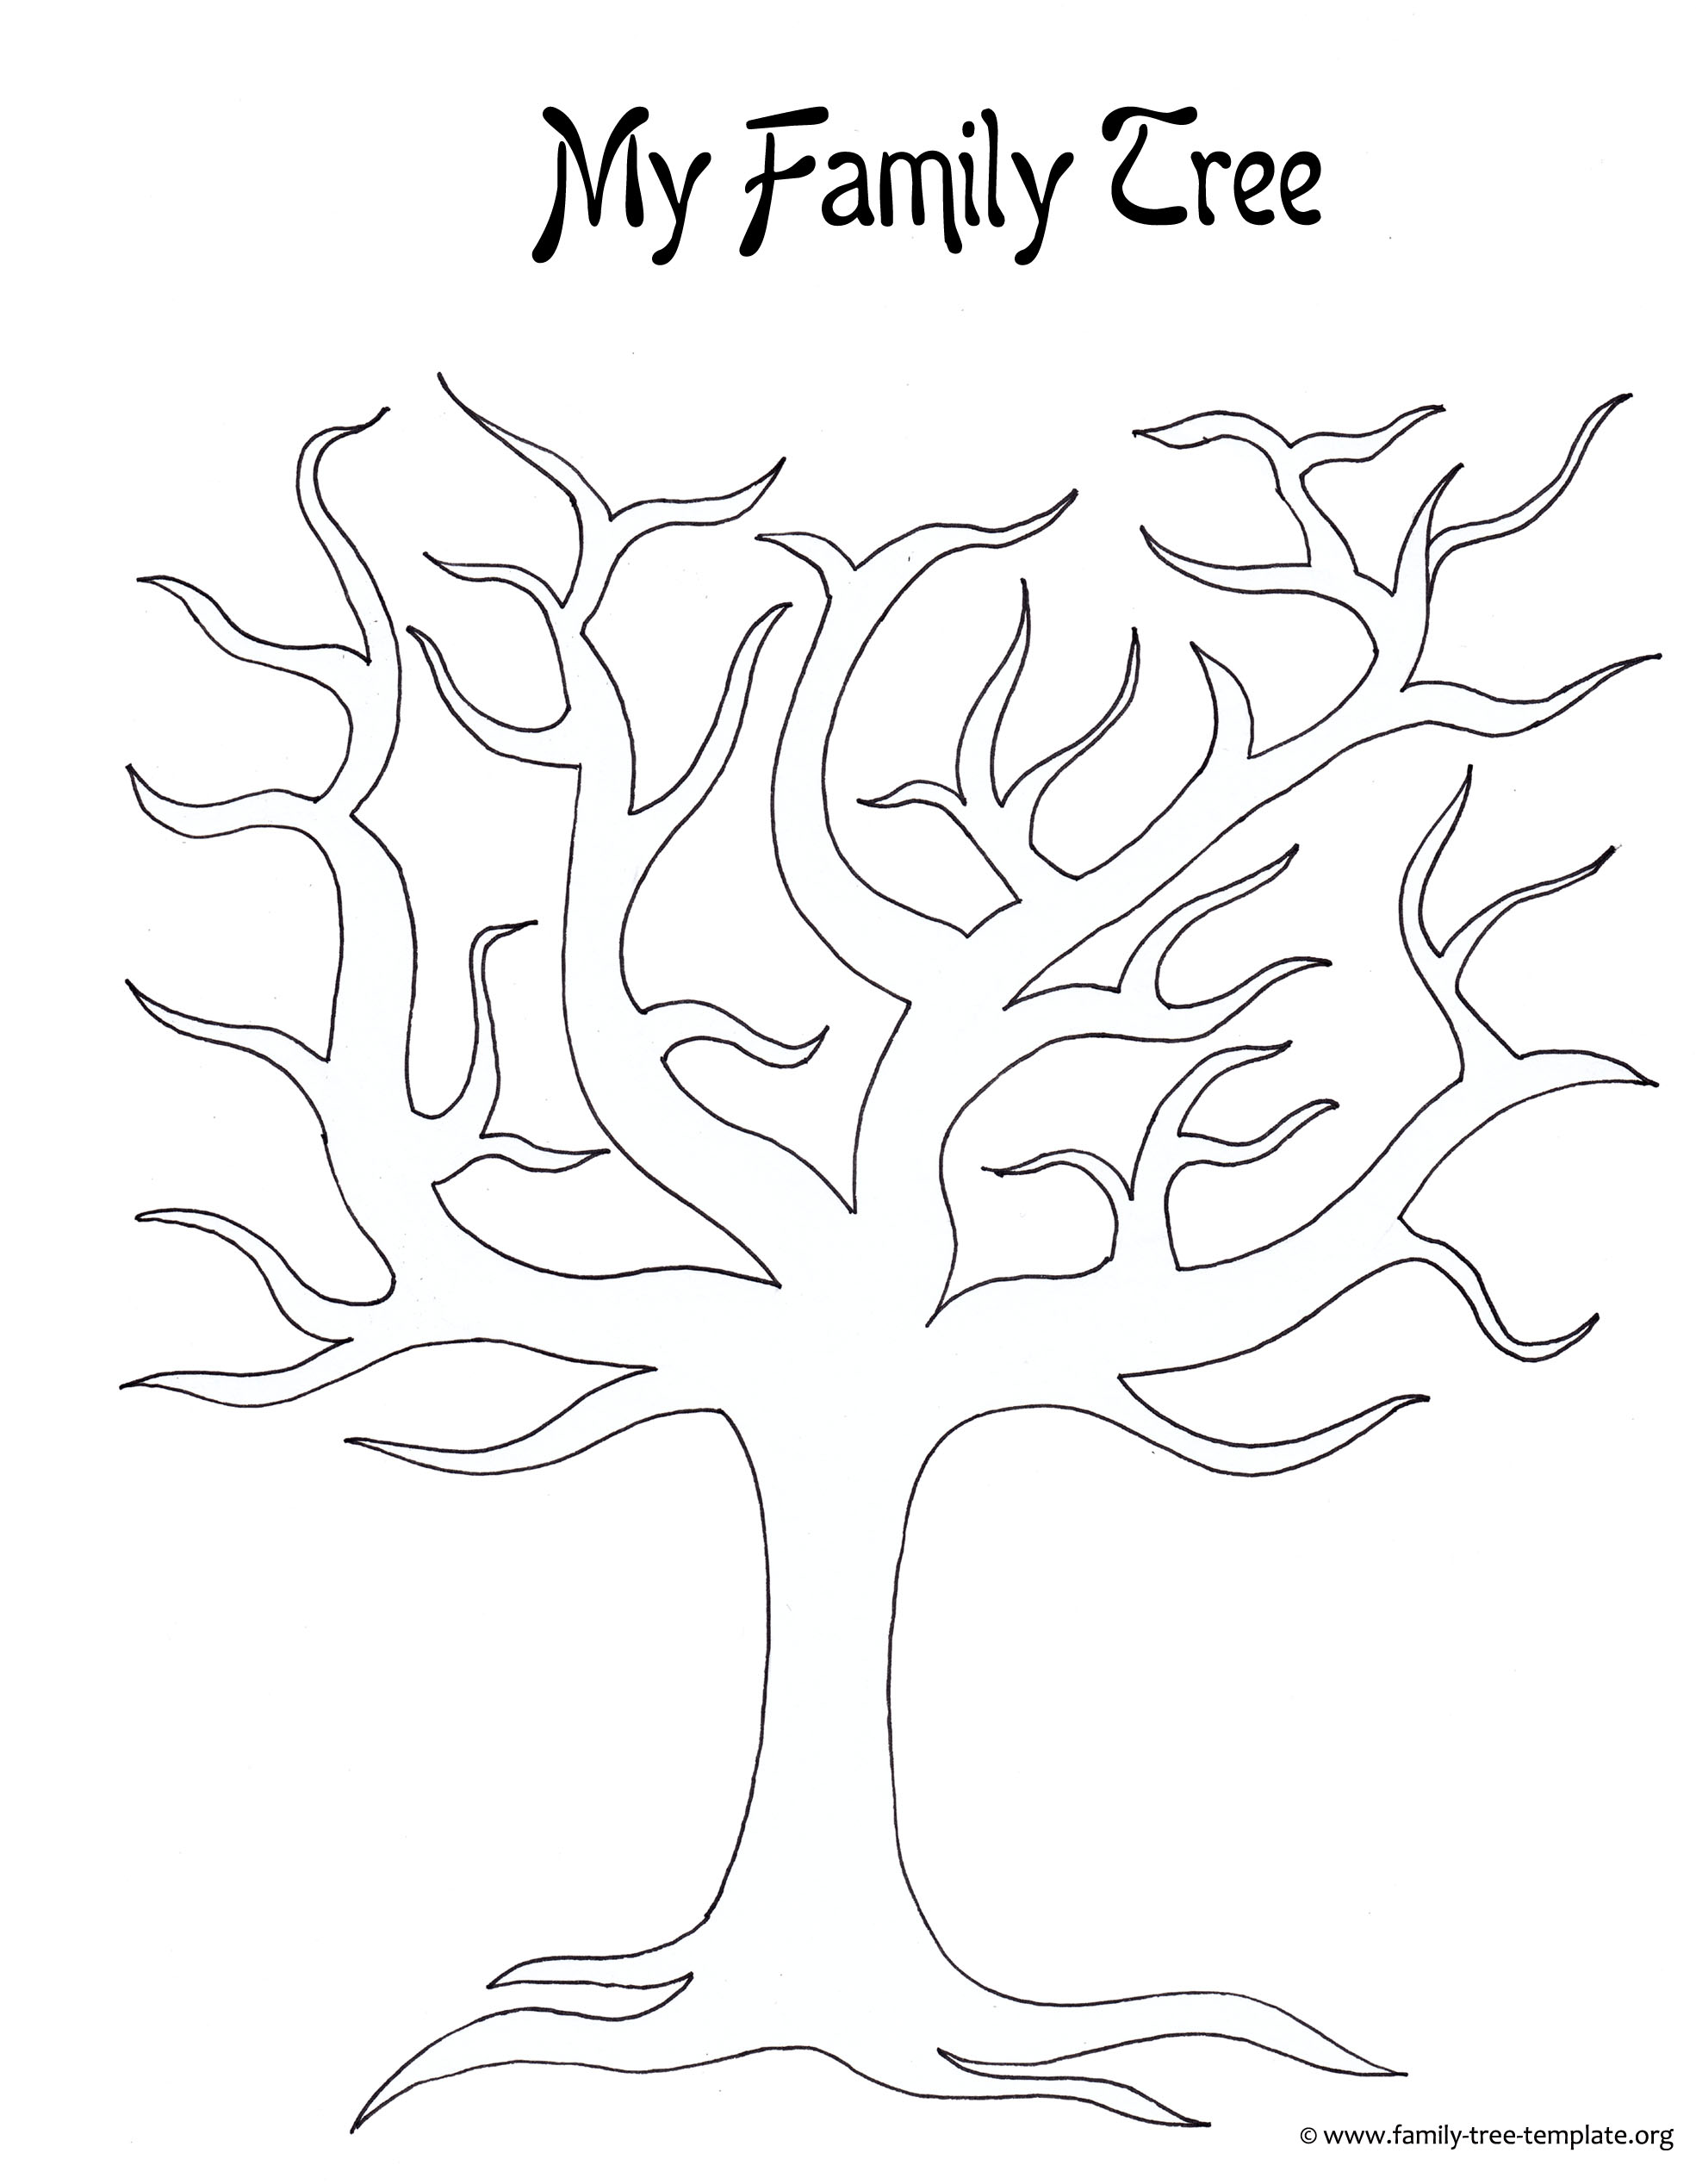 Family tree to print and for kids to color.